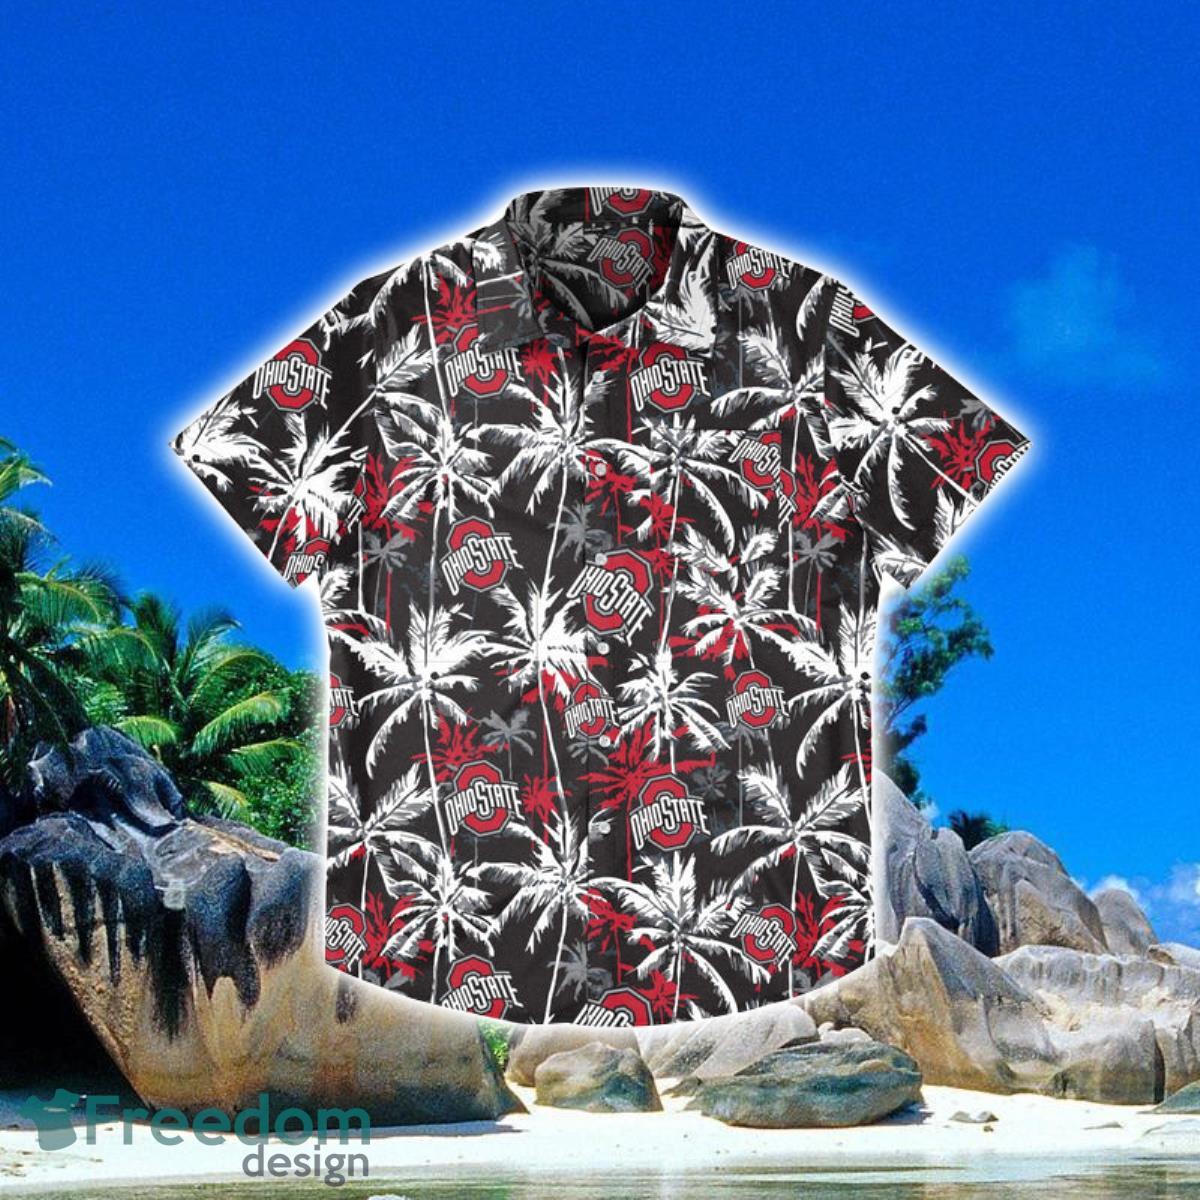 https://image.freedomdesignstore.com/2023-07/ohio-state-buckeyes-ncaa-black-floral-hawaiian-shirt-special-gift-for-fans.png